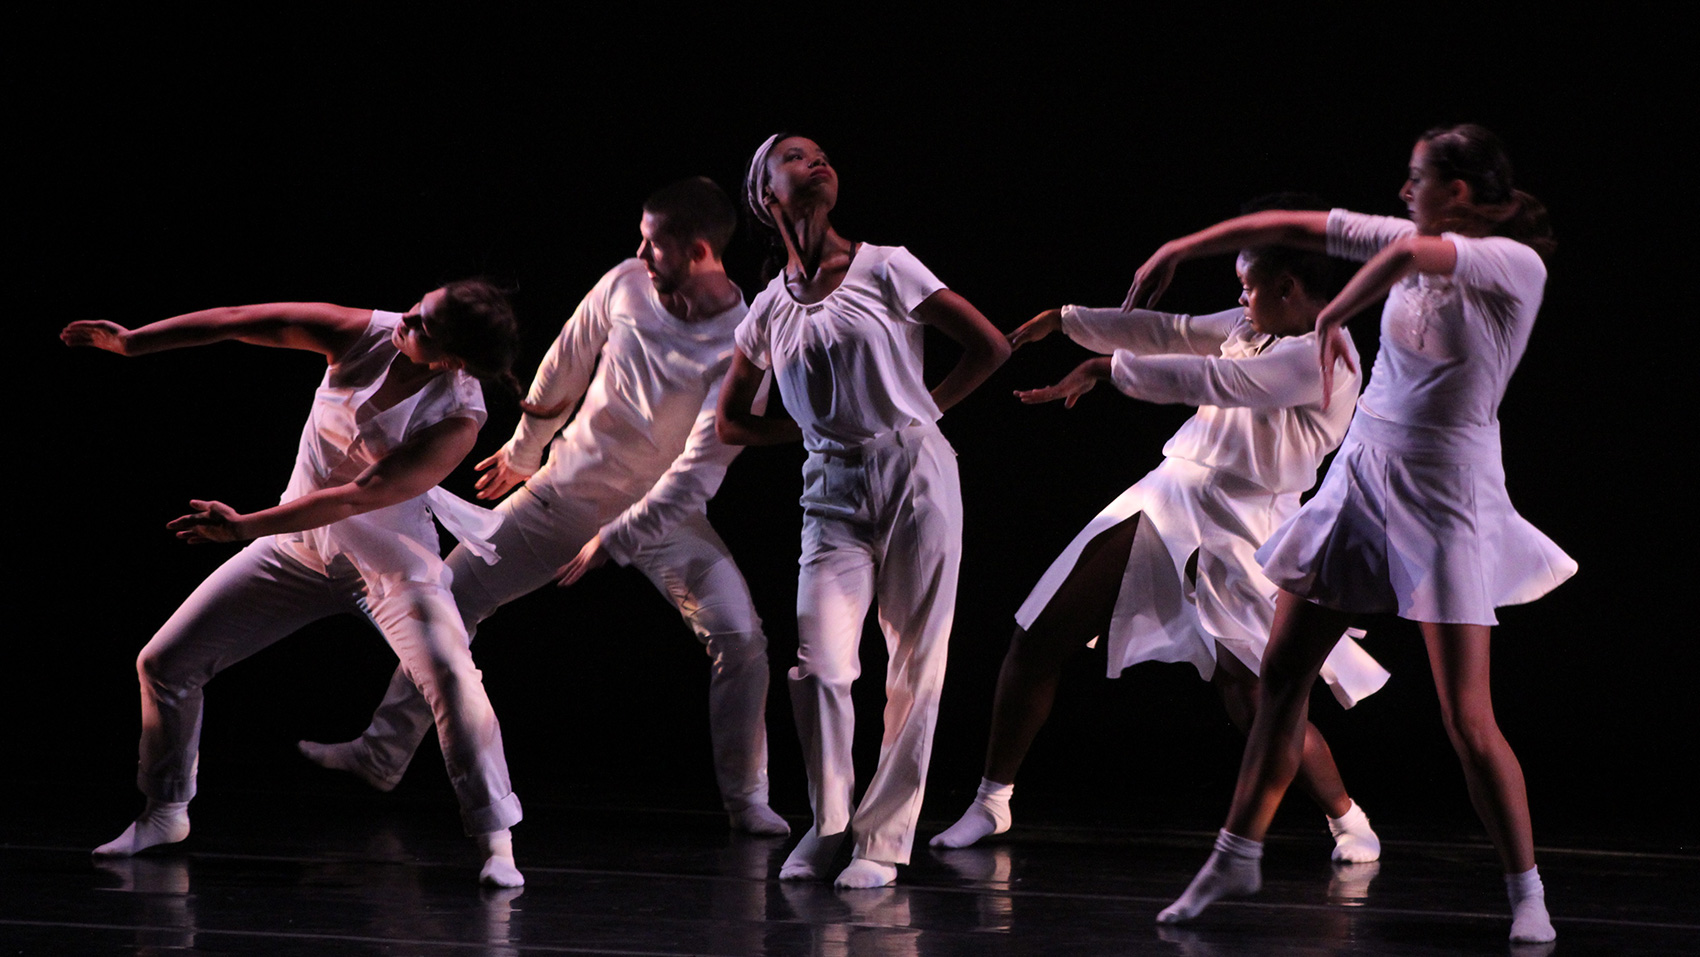 One Black female dancer stands in the center, her hands behind her back. She looks upwards. Four other dancers beside and behind her dance the same pose, they stretch their arms and turn their faces in the direction opposite to the center dancer.